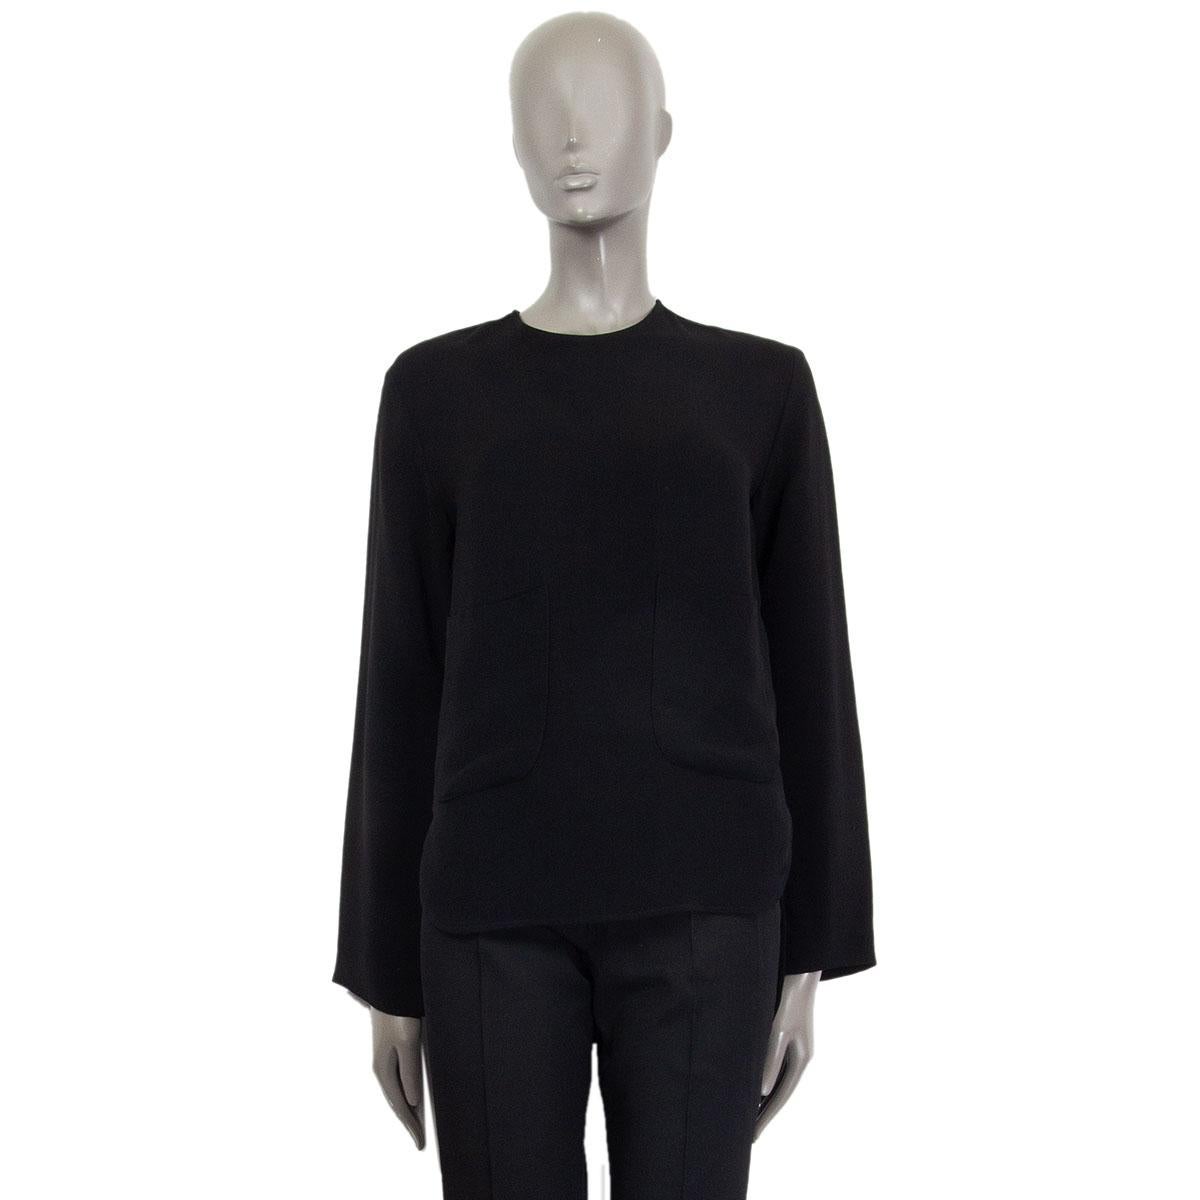 authentic Stella McCartney long-sleeve round-neck blouse in black viscose (79%) and acetate (21%). Features a longer back and two patch pockets at front. Opens with a zipper on the back. Has been worn and is in excellent condition. 

Tag Size